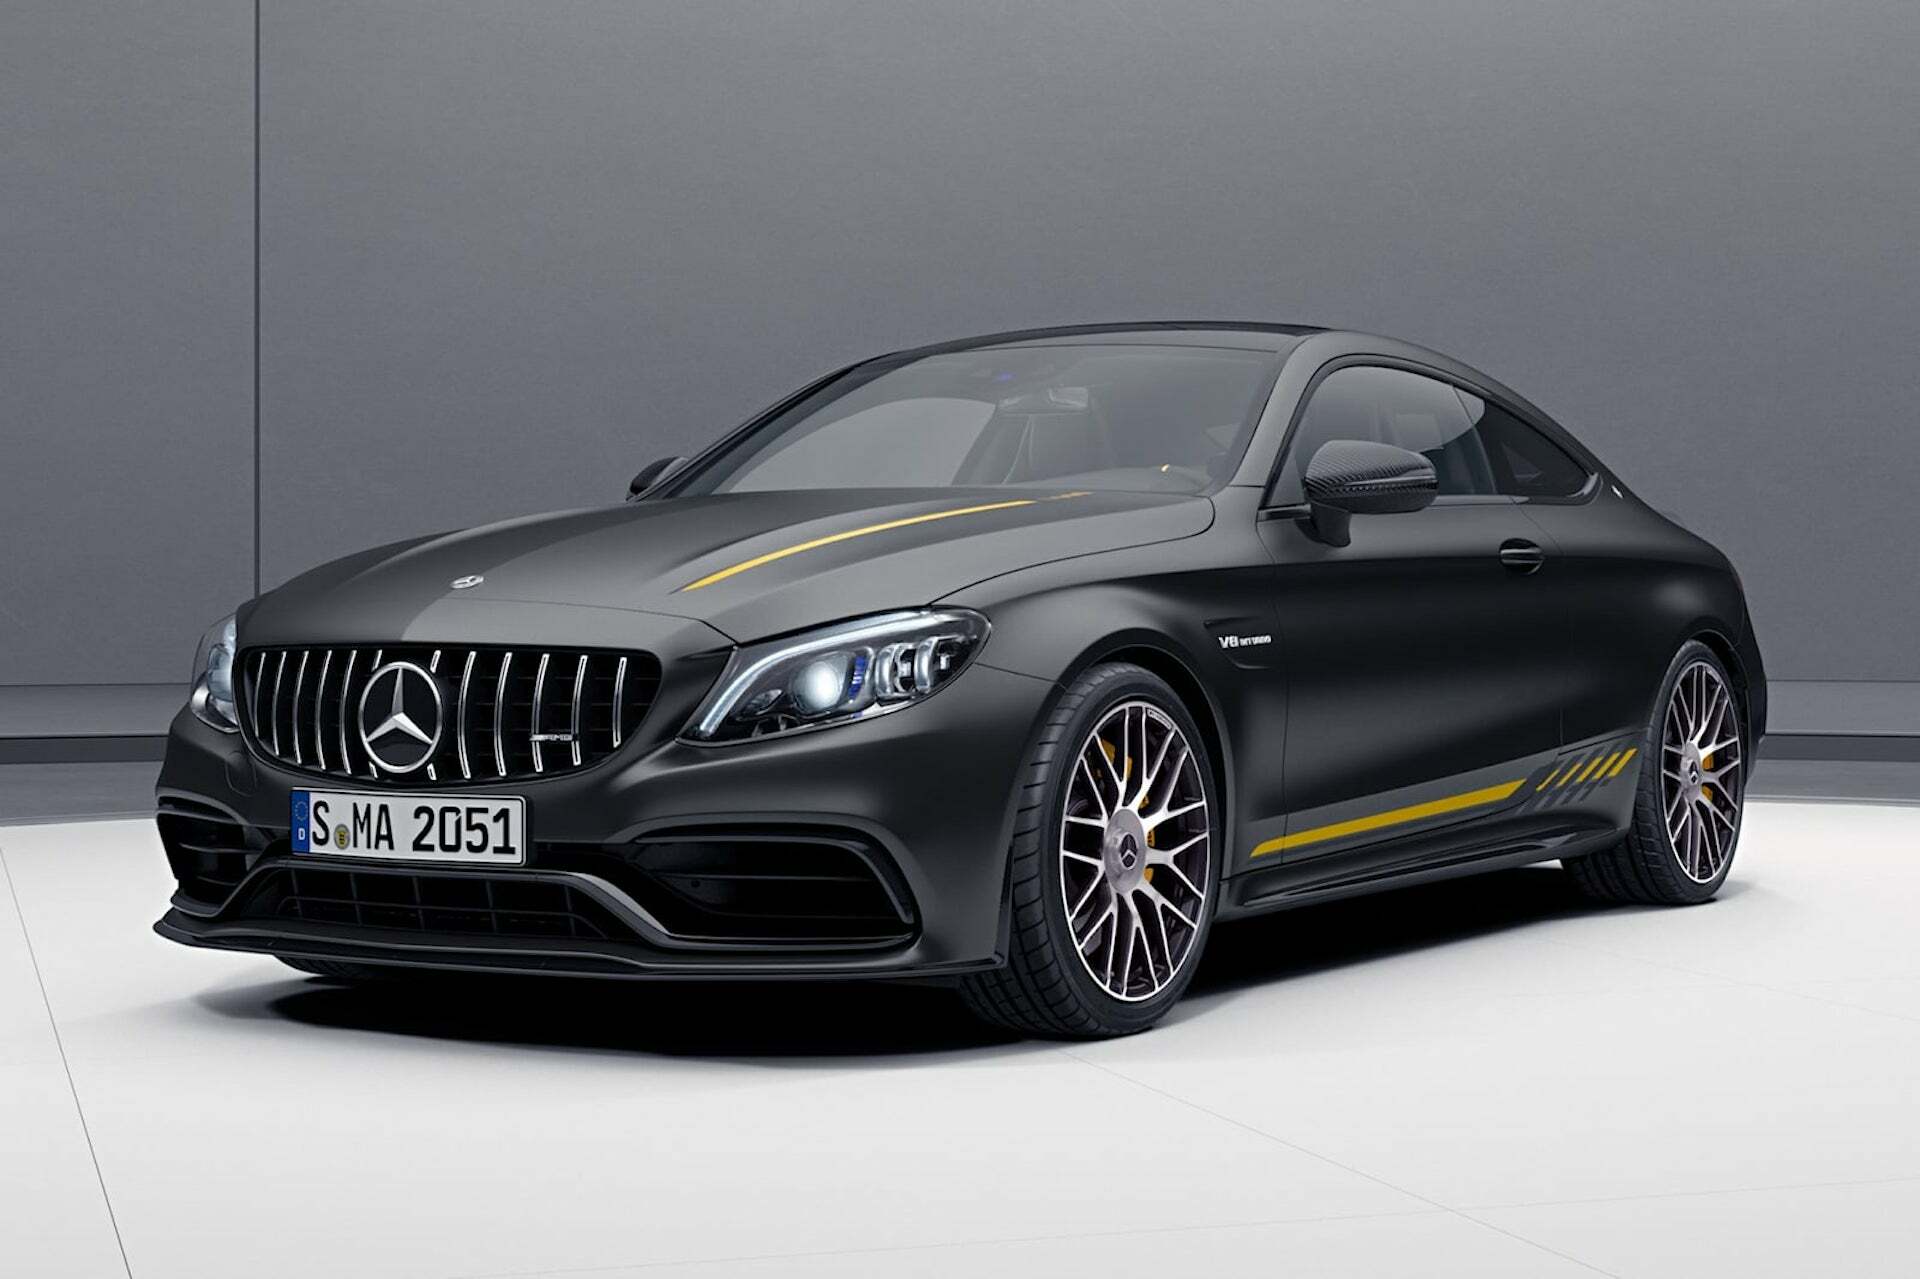 There will be one last chance to buy a V8-powered C-Class, but we won't get it in Europe